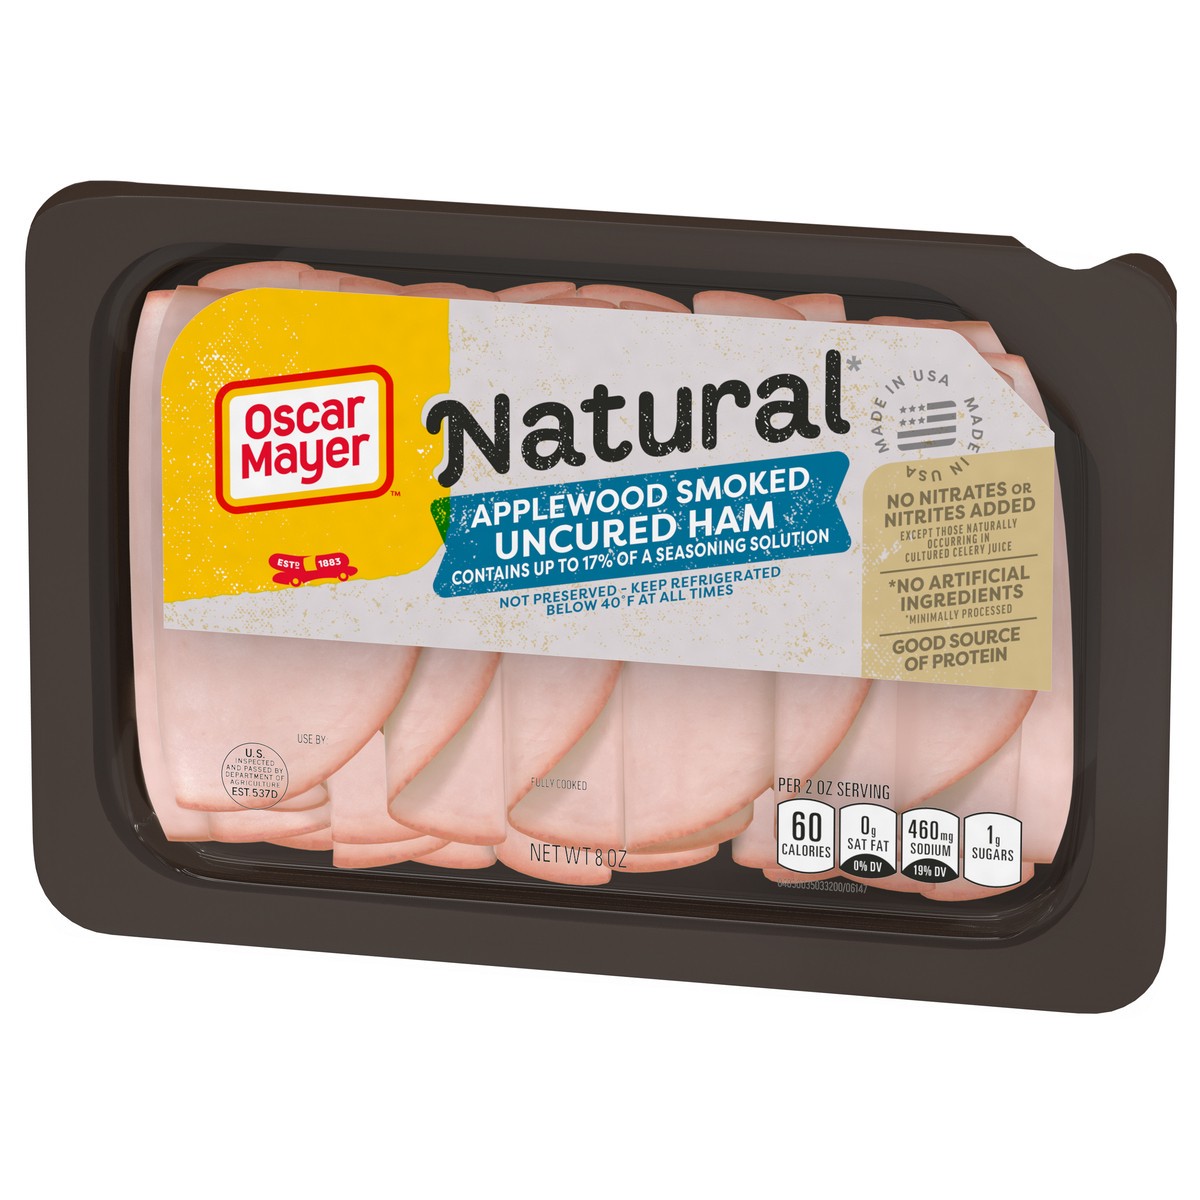 slide 8 of 13, Oscar Mayer Natural Applewood Smoked Uncured Ham Sliced Lunch Meat, 8 oz. Tray, 8 oz